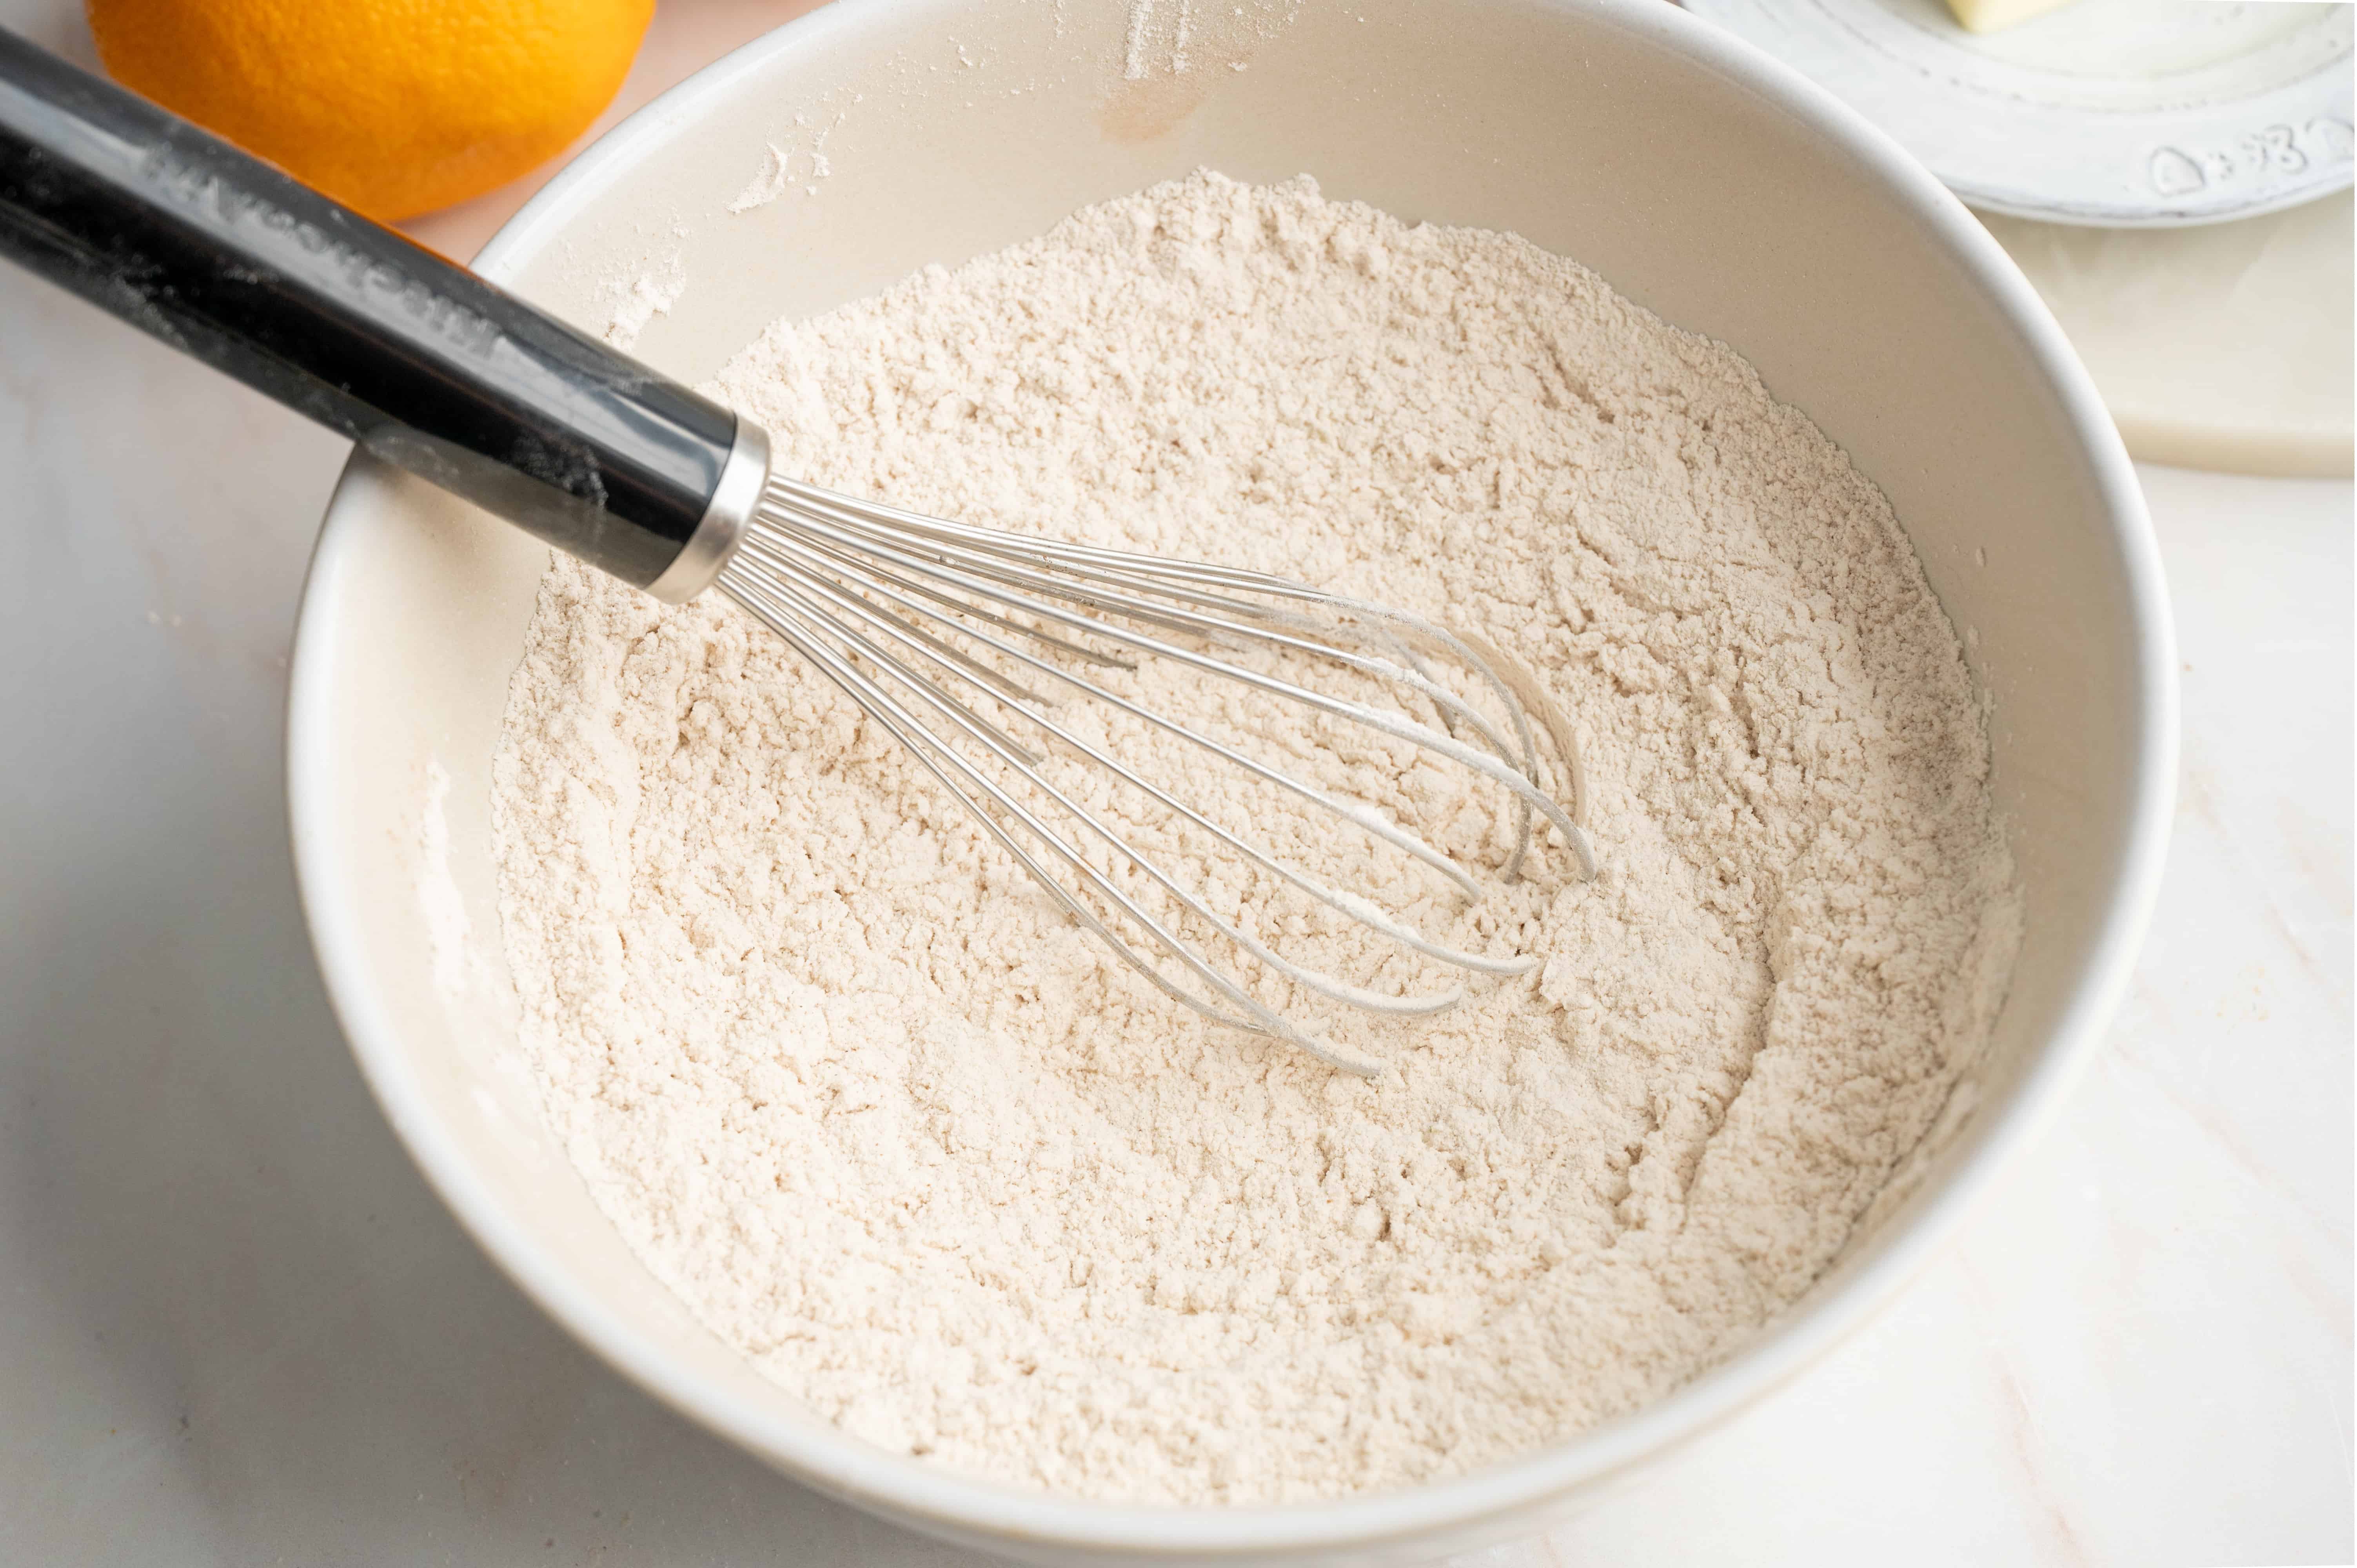 Flour and baking powder in a large bowl with a whisk